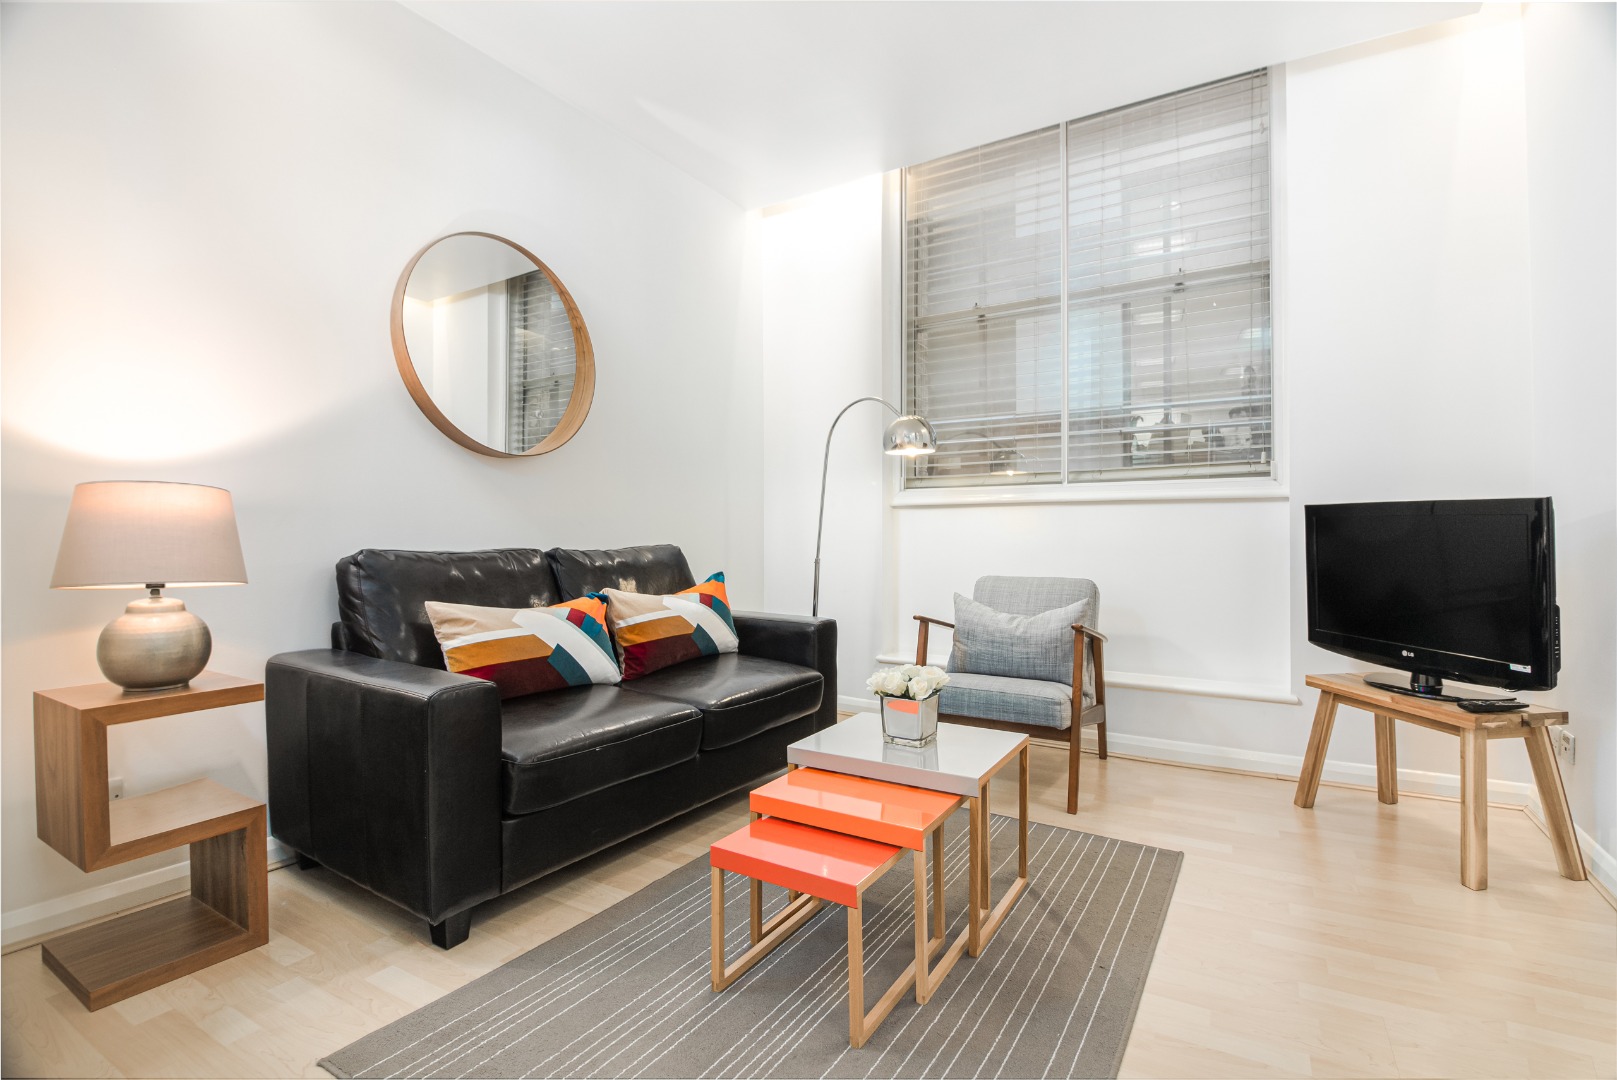 Make yourself feel right at home in this lovely one bedroom apartment!